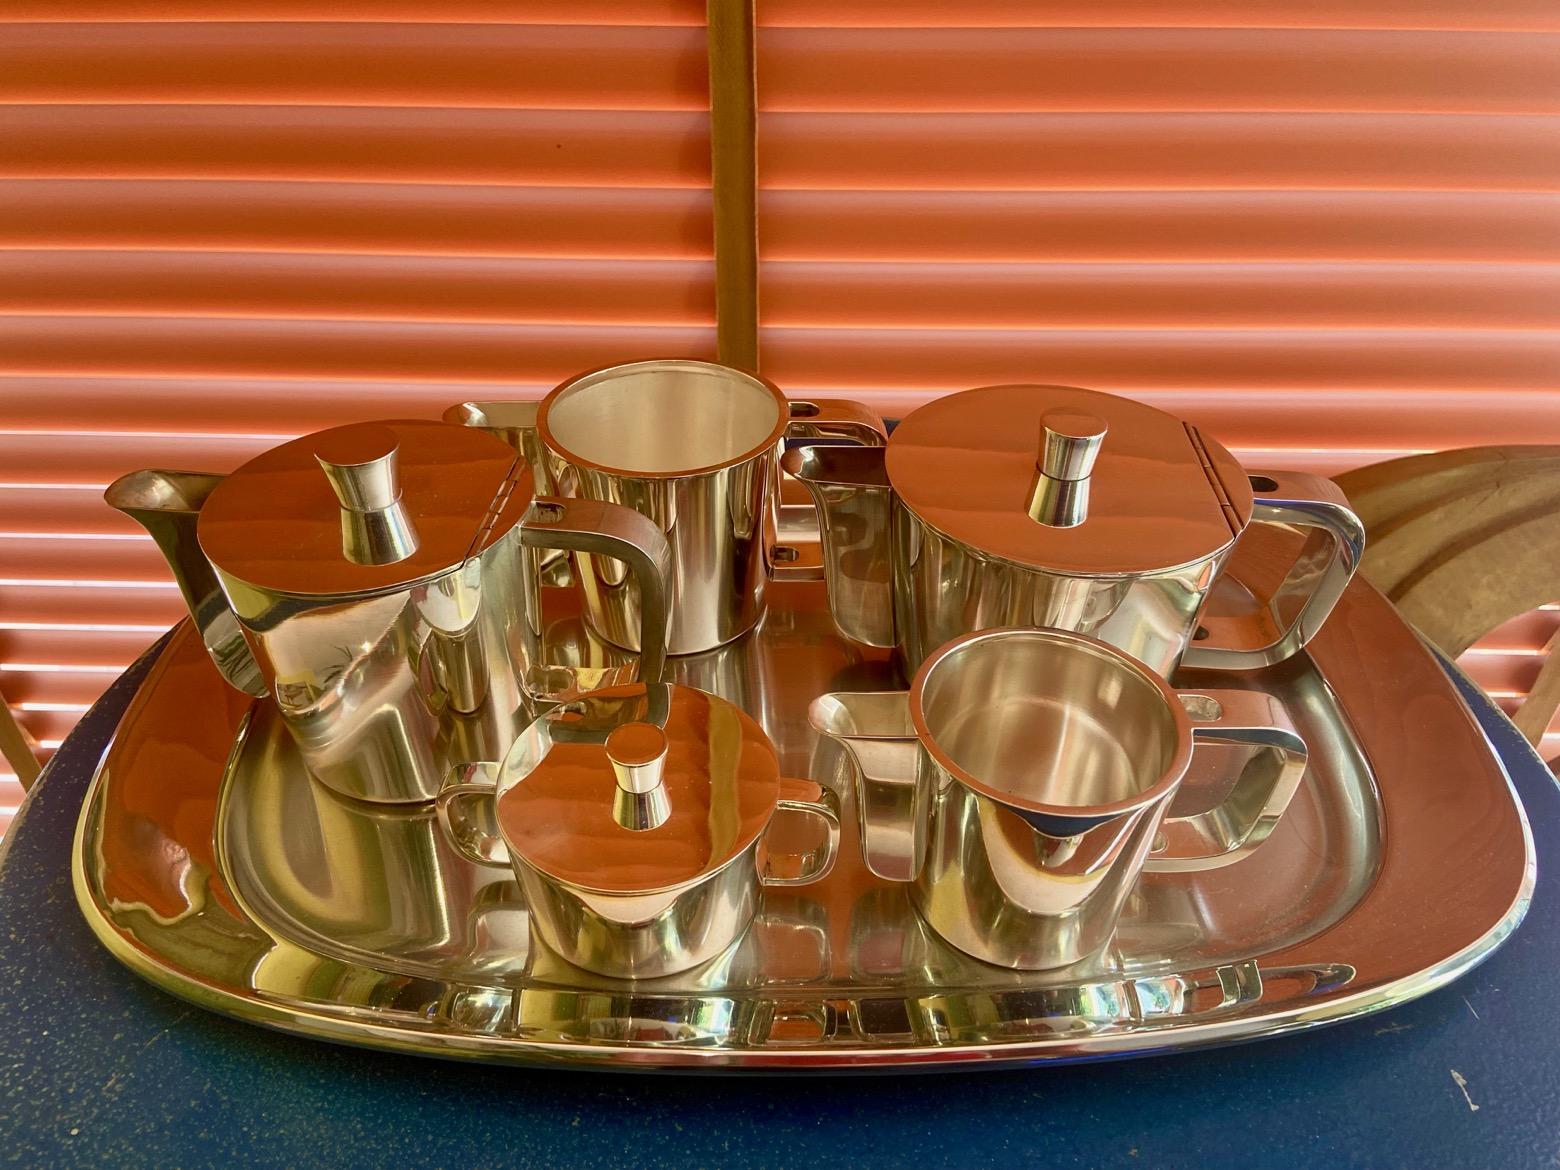 Silvered Extensive Silver Plated Gio Ponti Coffee and Tea Set on a Tray, Arthur Krupp